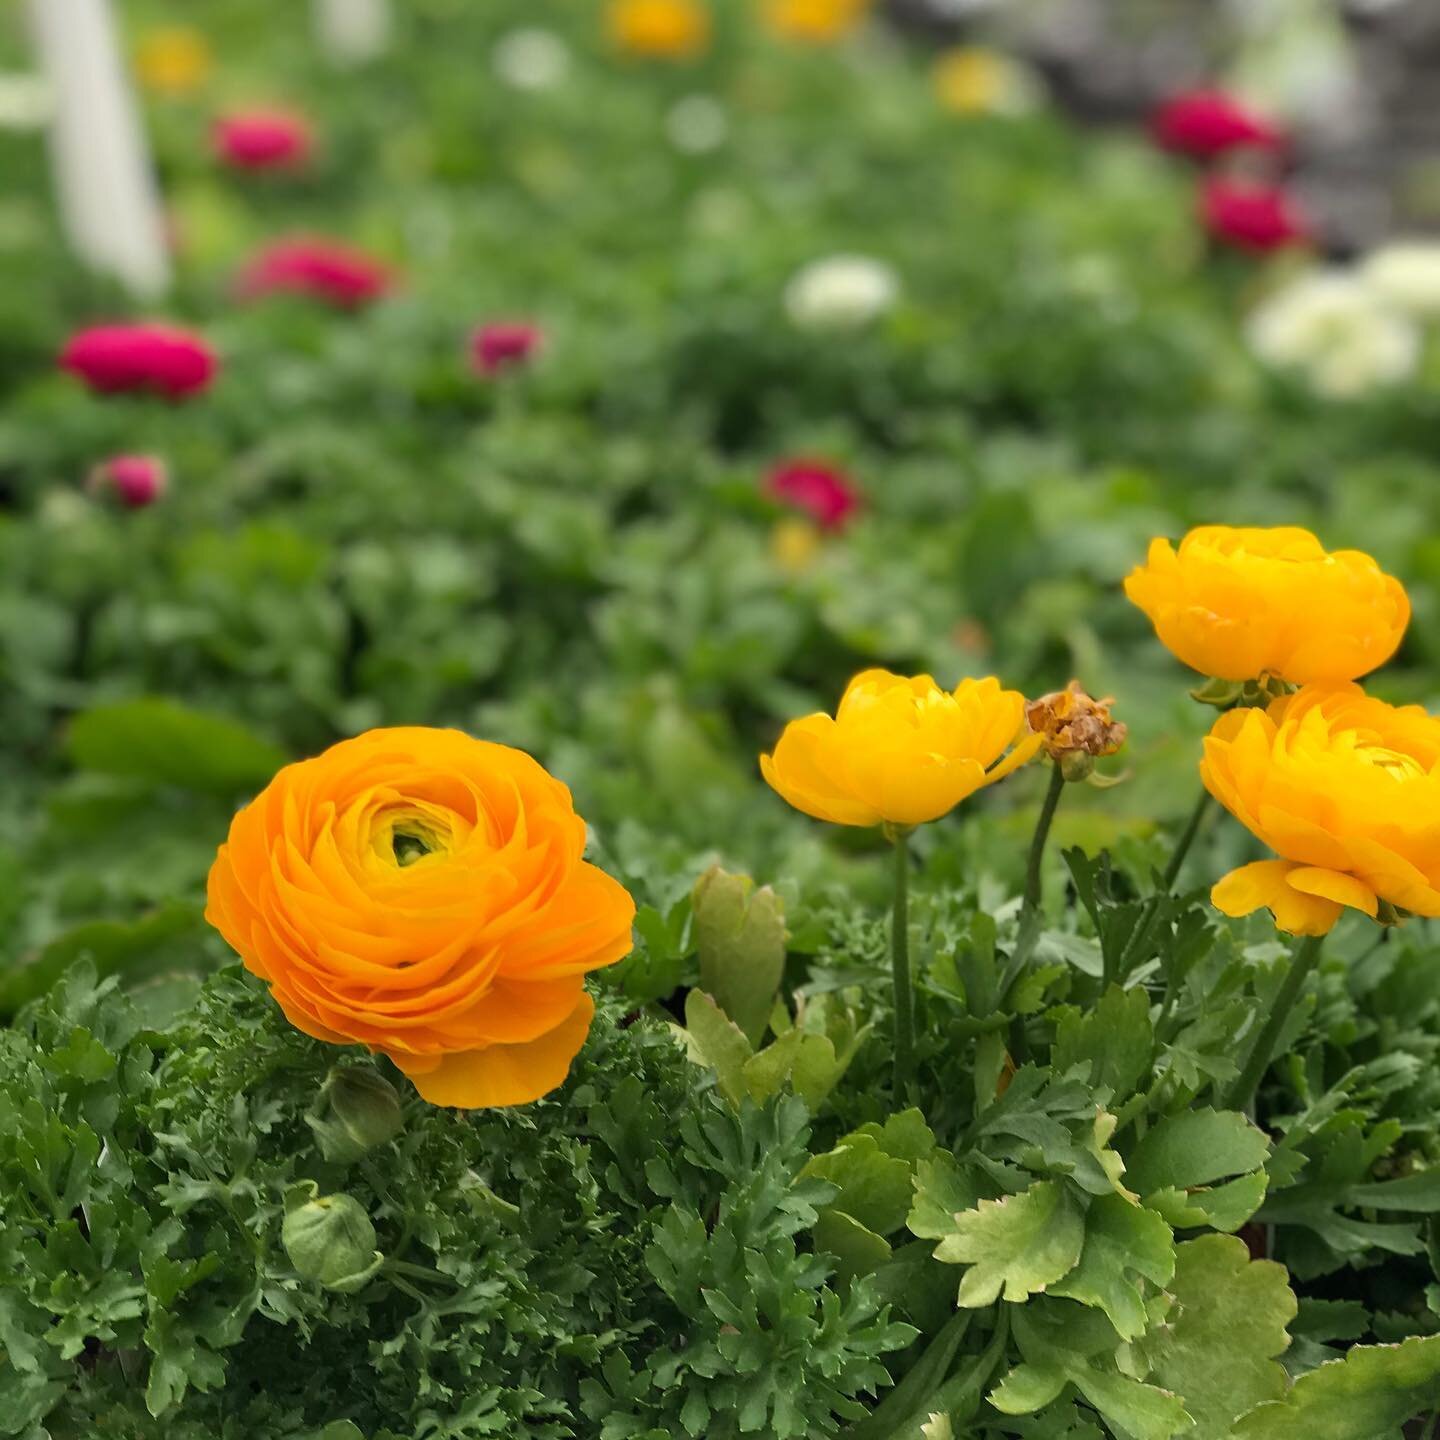 Lots of color is showing up around here.  Like these Ranunculus!  Hitting stores this week and next. 
#spring2020
#wardsgreenhouse #idaho #springiscoming #idahopreferred #ranunculus